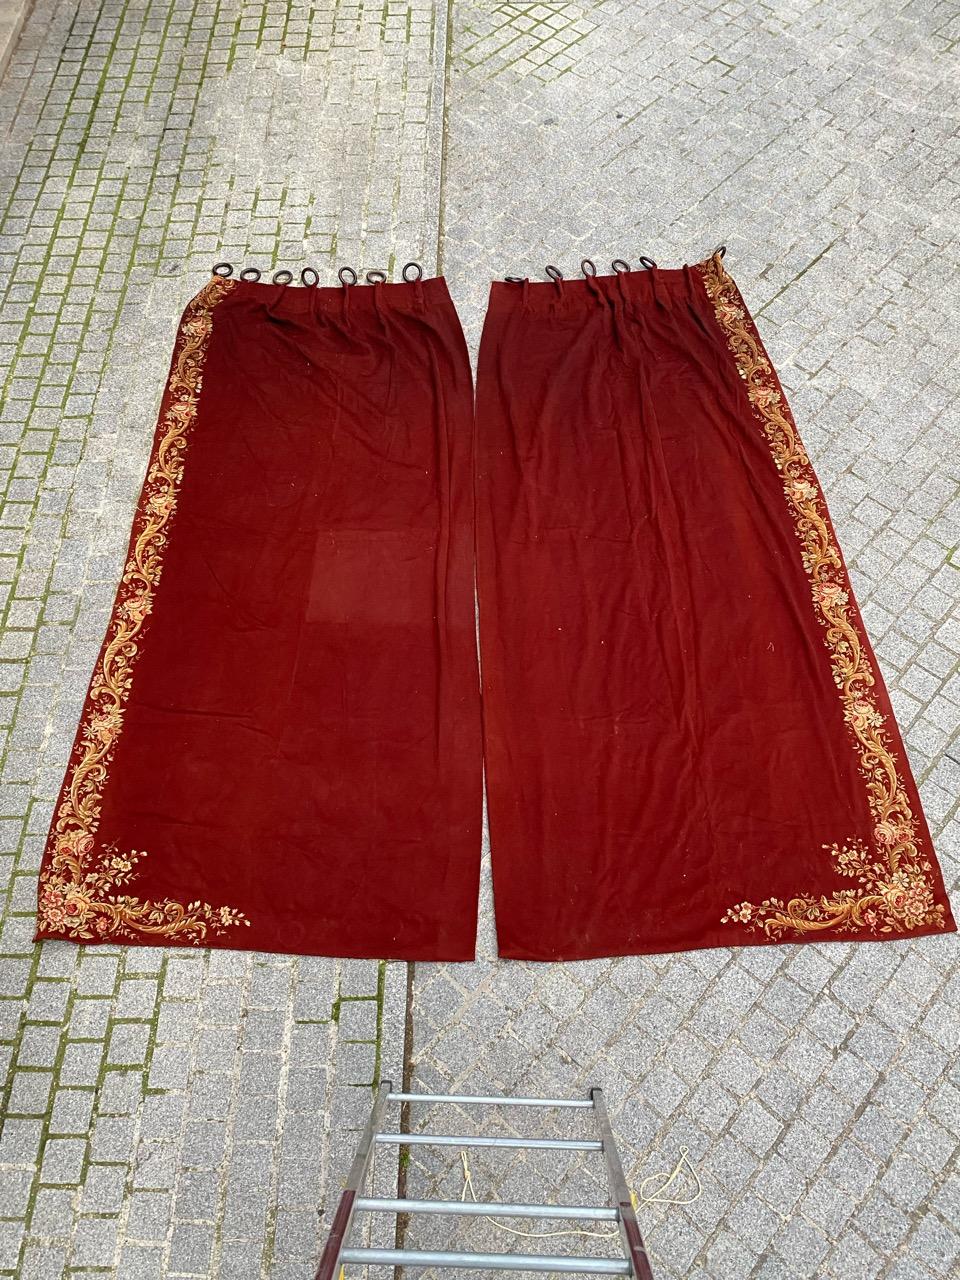 Bobyrug’s Very Beautiful Embroidered Antique Pair of Curtains For Sale 12